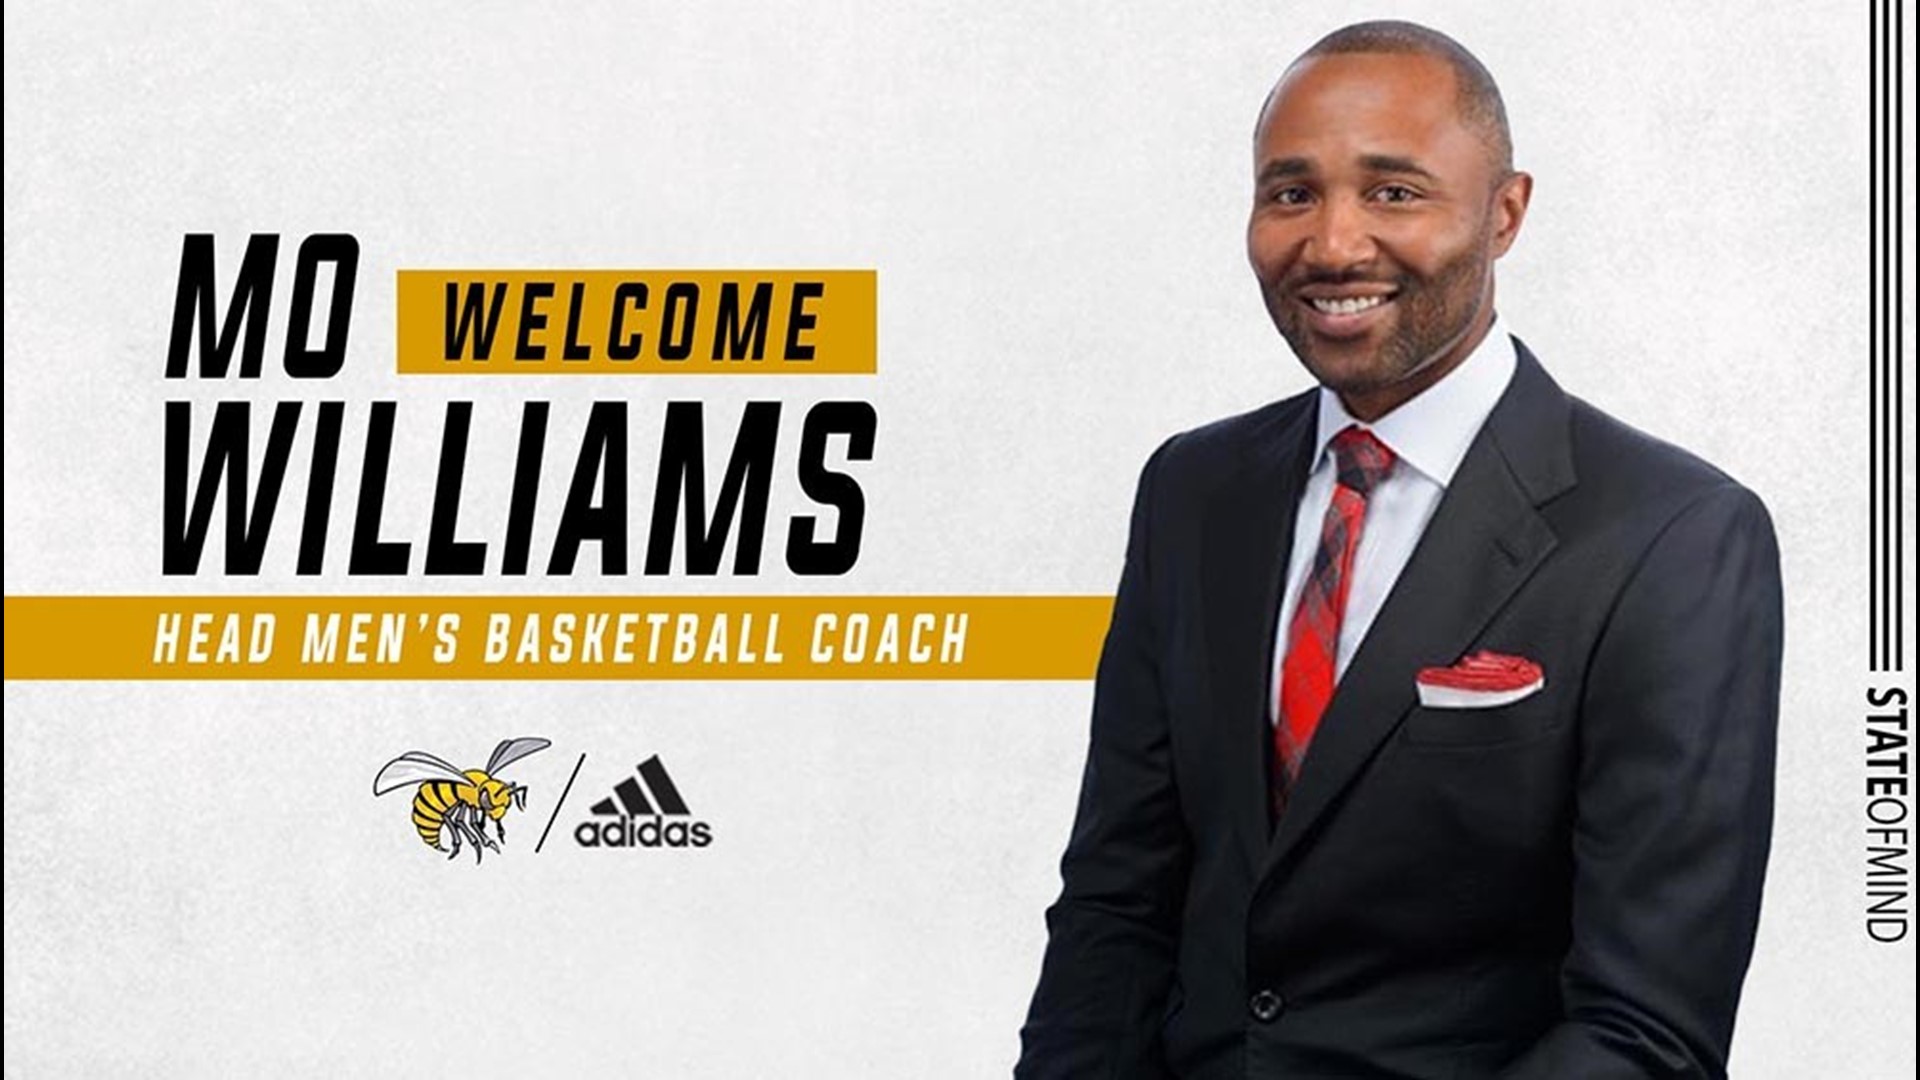 Alabama State hired former Crimson Tide standout and NBA Champion Mo Williams as the schools next men's basketball coach.